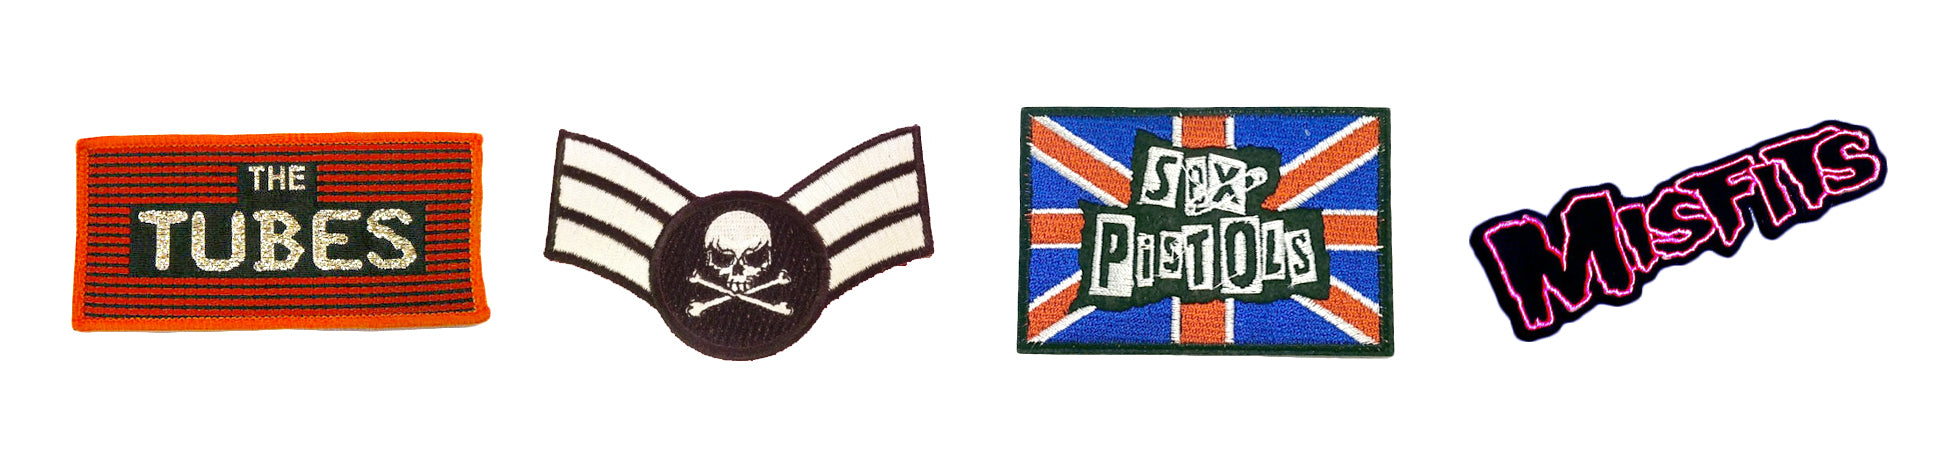 clothing-patches-history-punk2